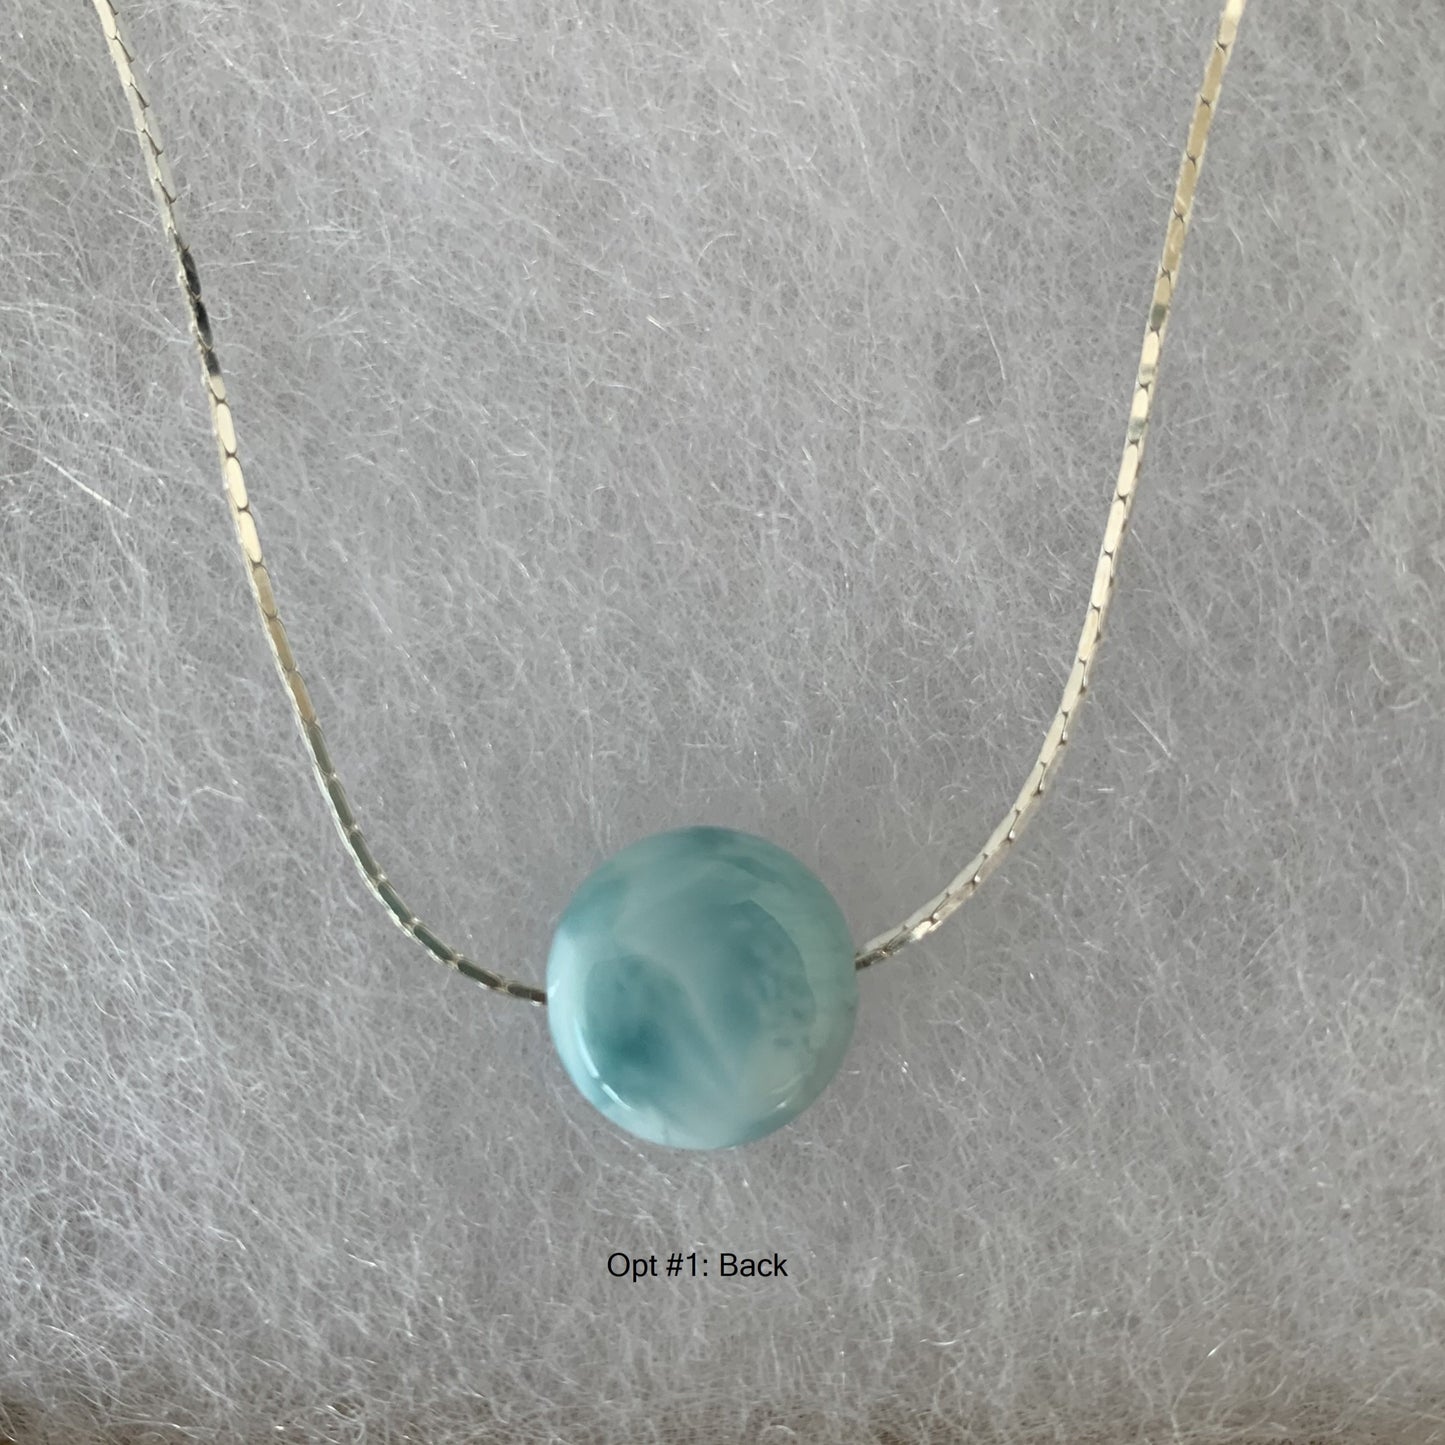 Larimar pendant on sterling silver chain